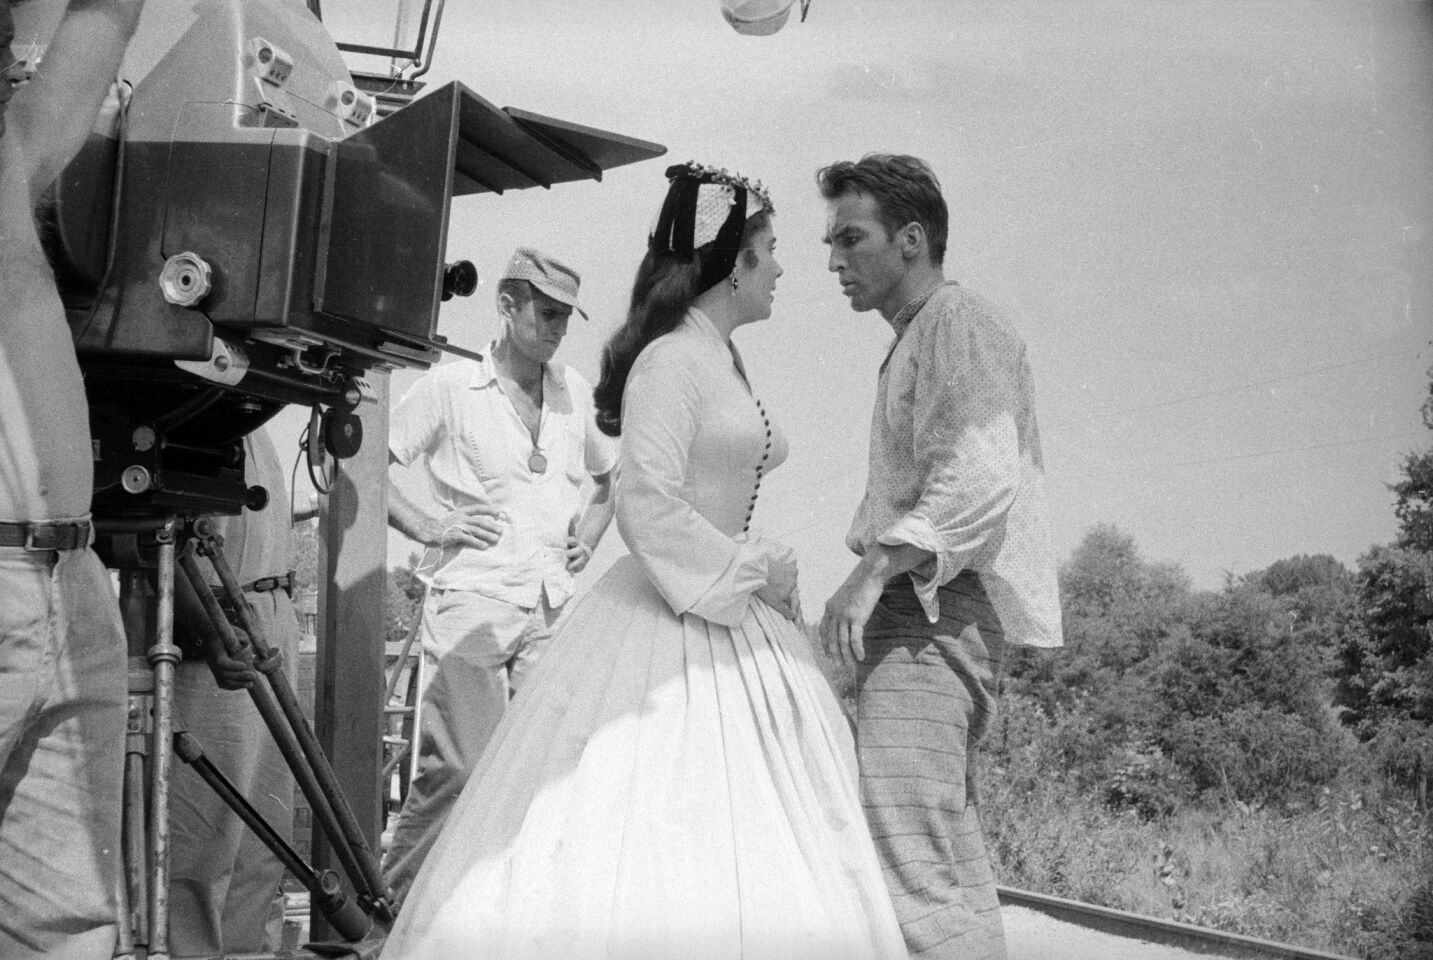 February 1958: Montgomery Clift on location in Indiana with Elizabeth Taylor for the filming of "Raintree County."